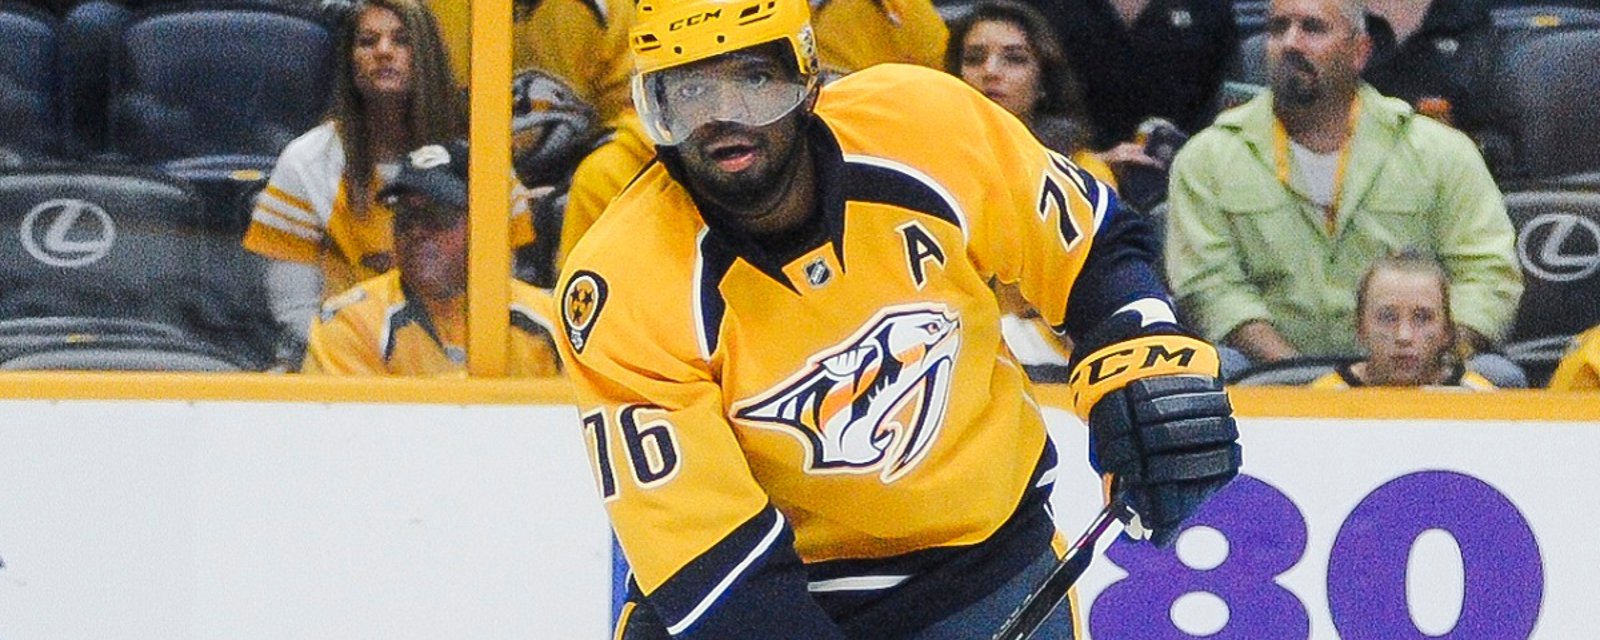 General manager confirms Subban injury more serious than originally believed.